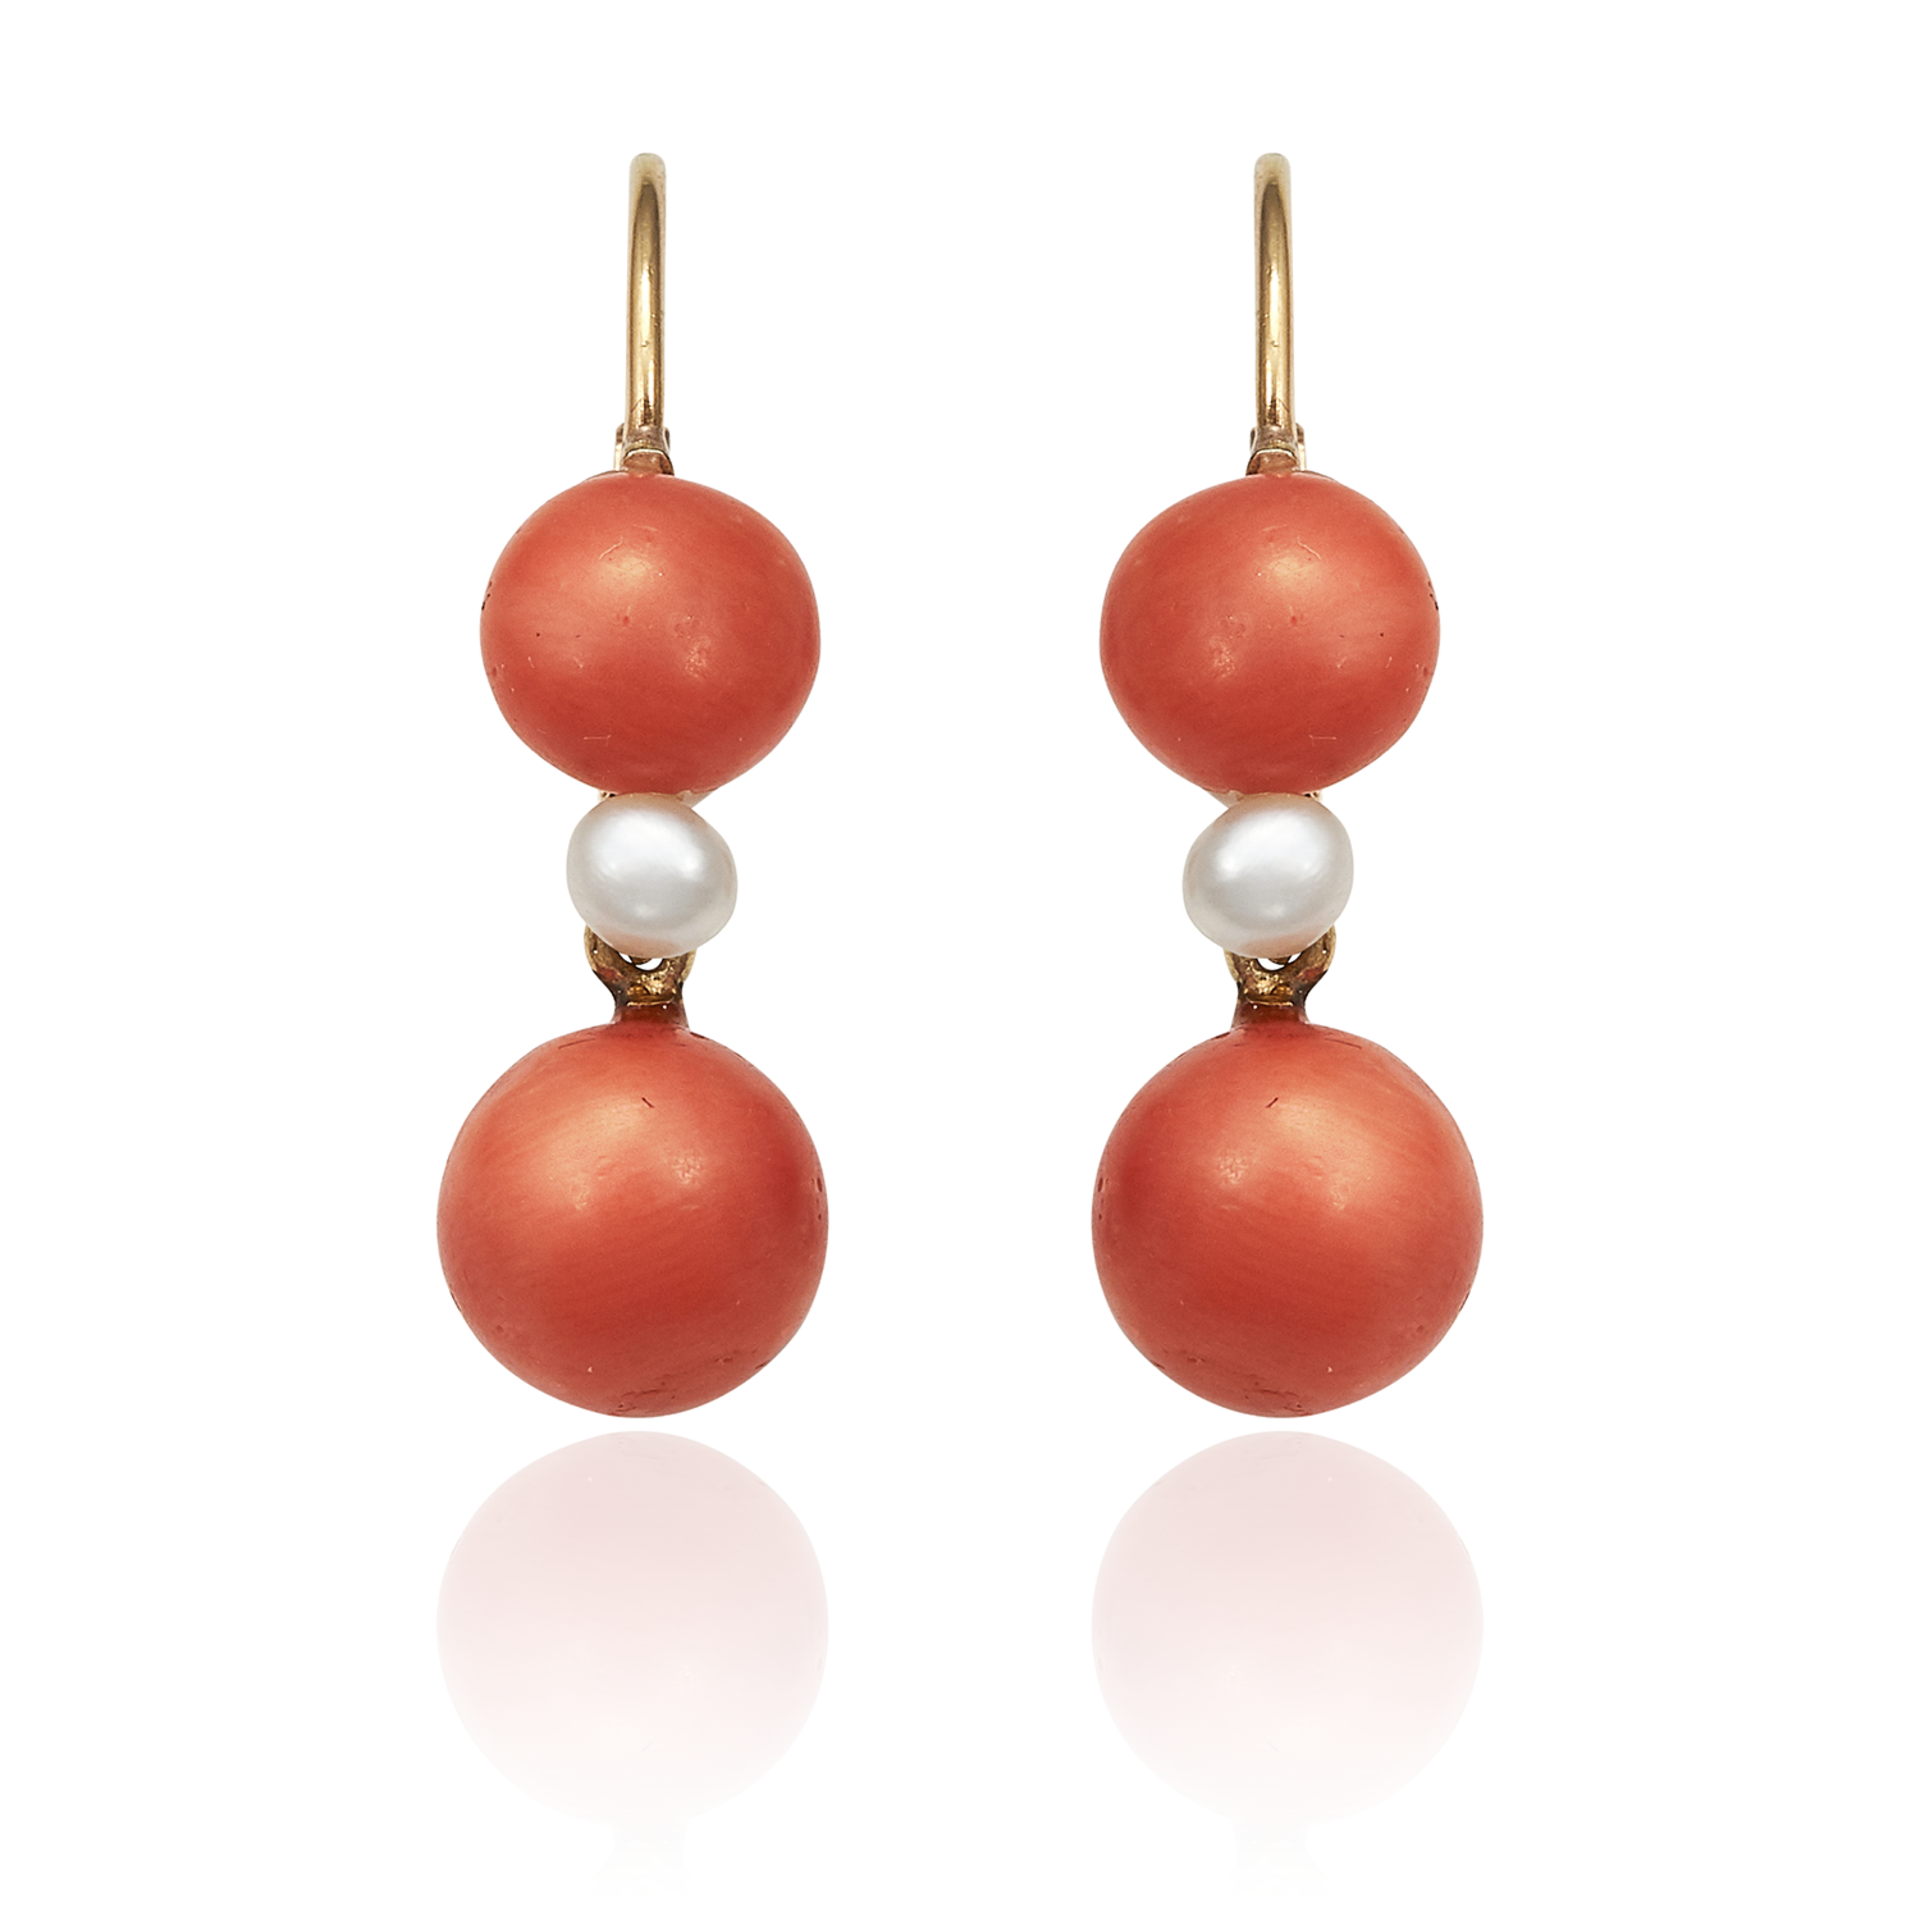 A PAIR OF ANTIQUE CORAL AND PEARL EARRINGS in high carat yellow gold, each set with a large coral